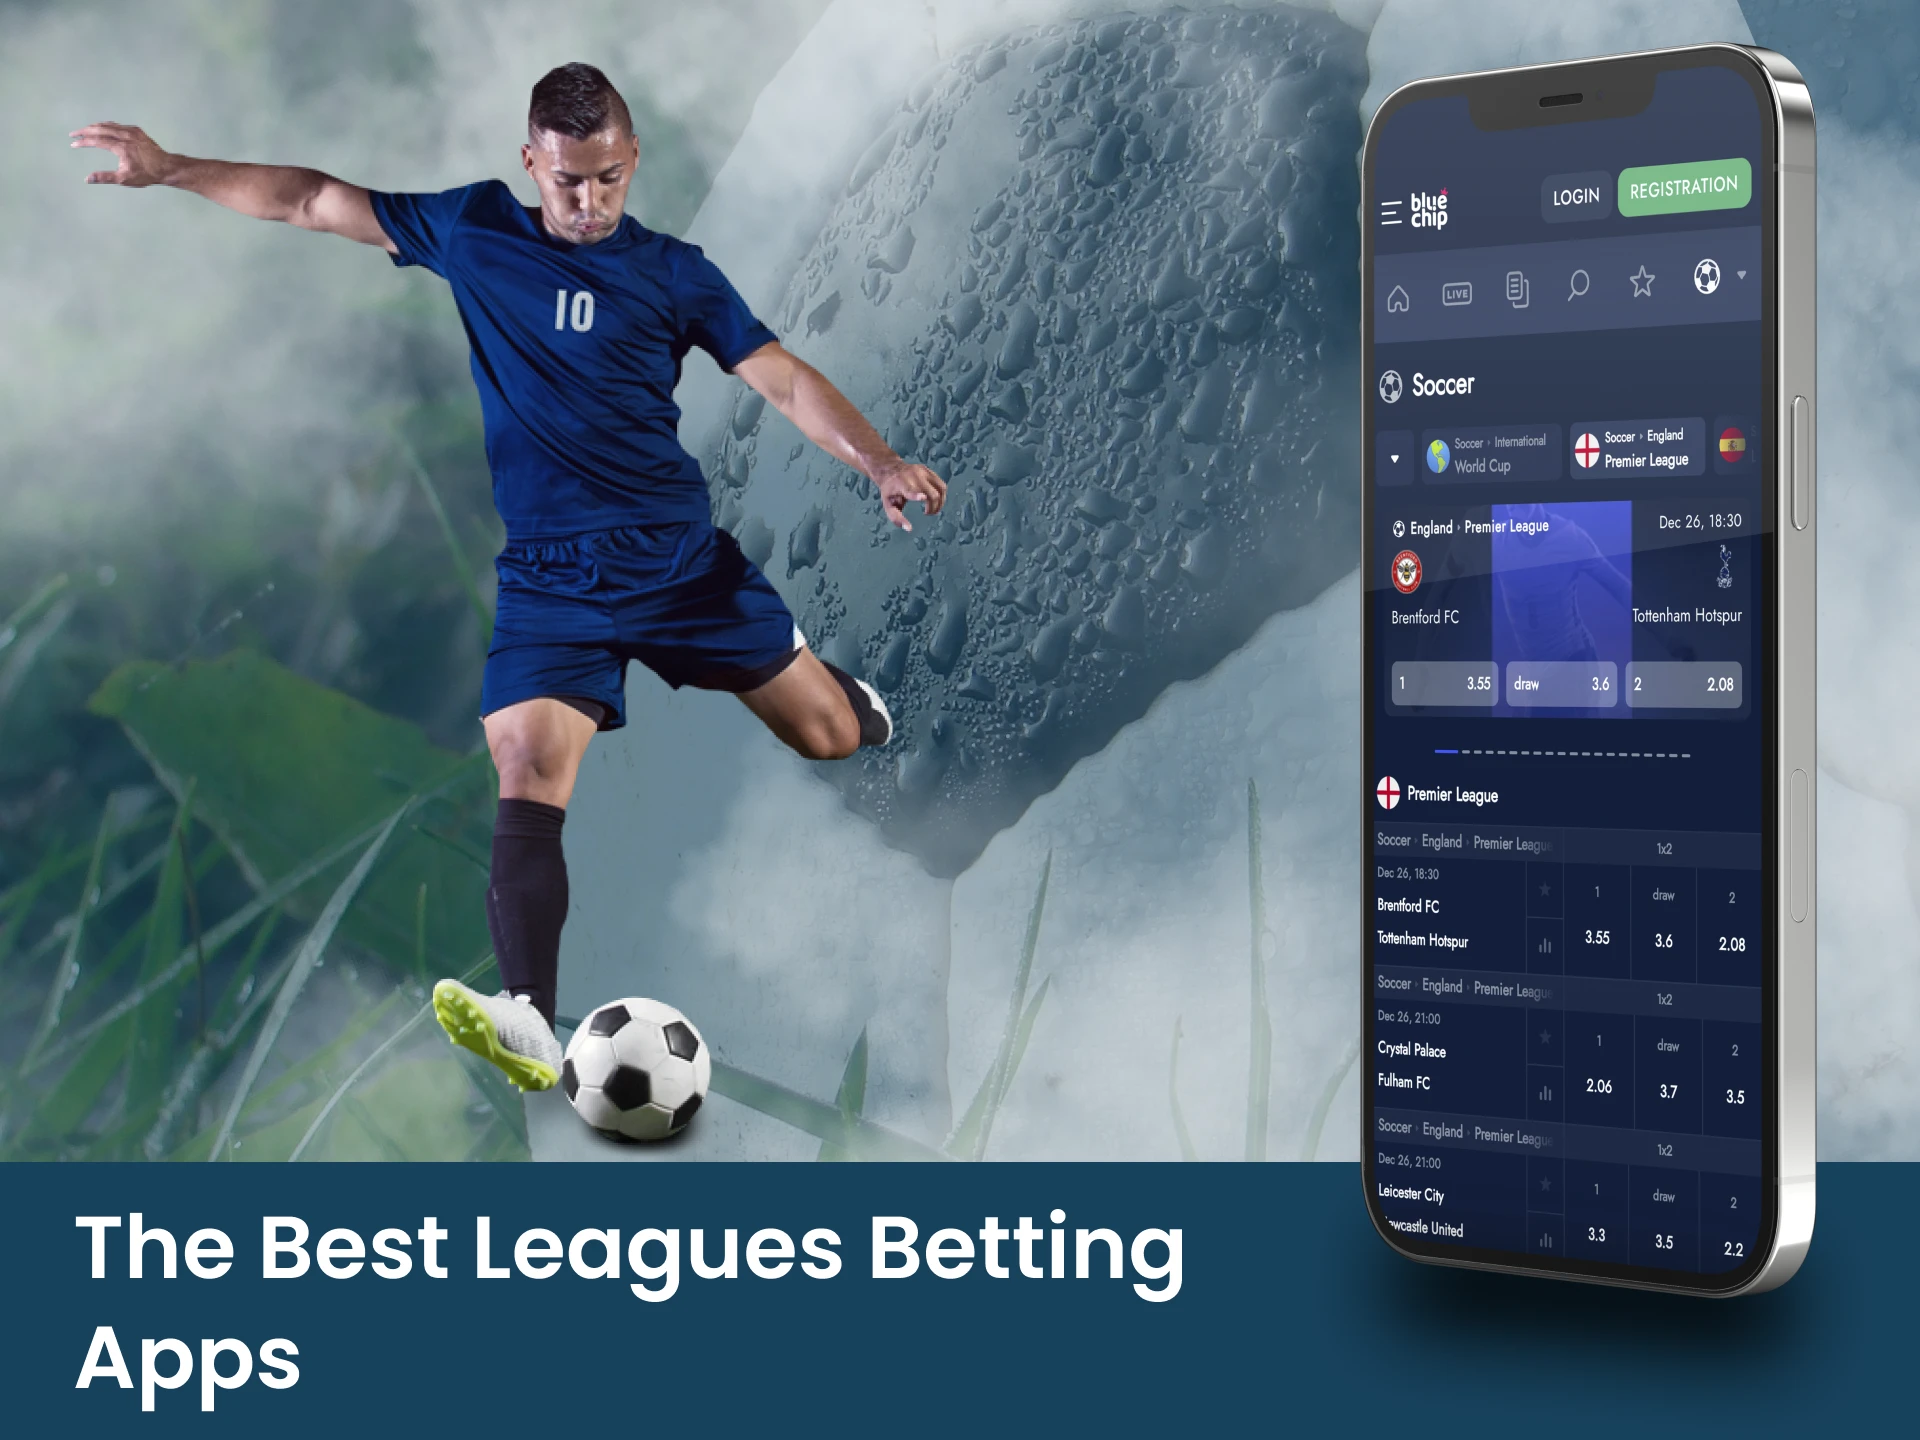 Here is a list of apps that have the most football leagues in the sportsbook.